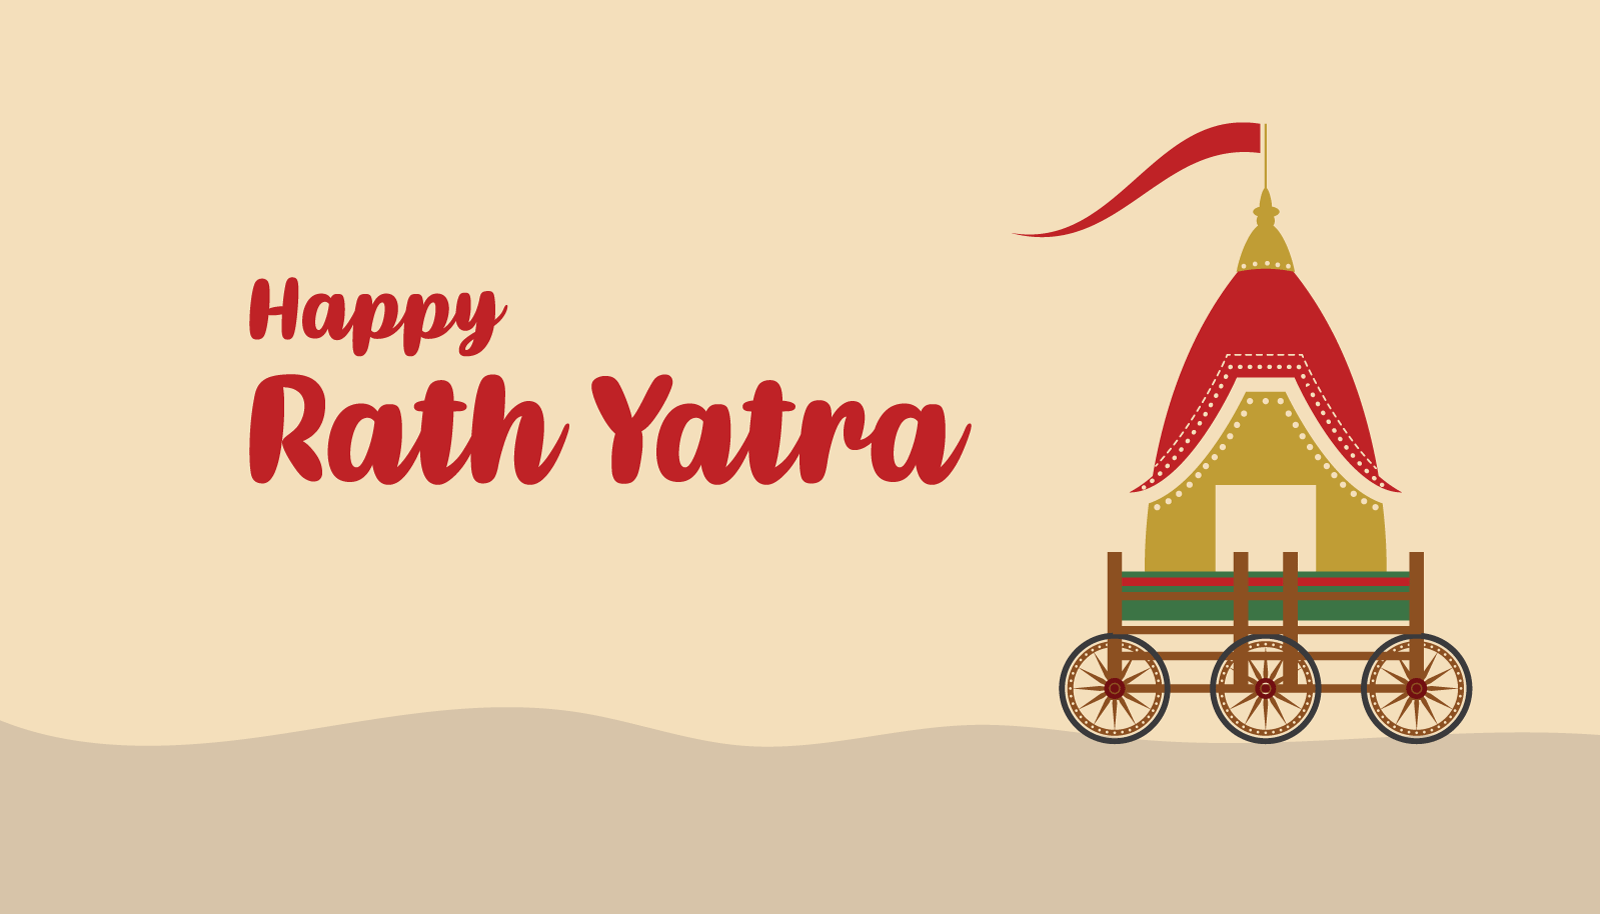 Rath Yatra Indian Festival background template vector flat design template